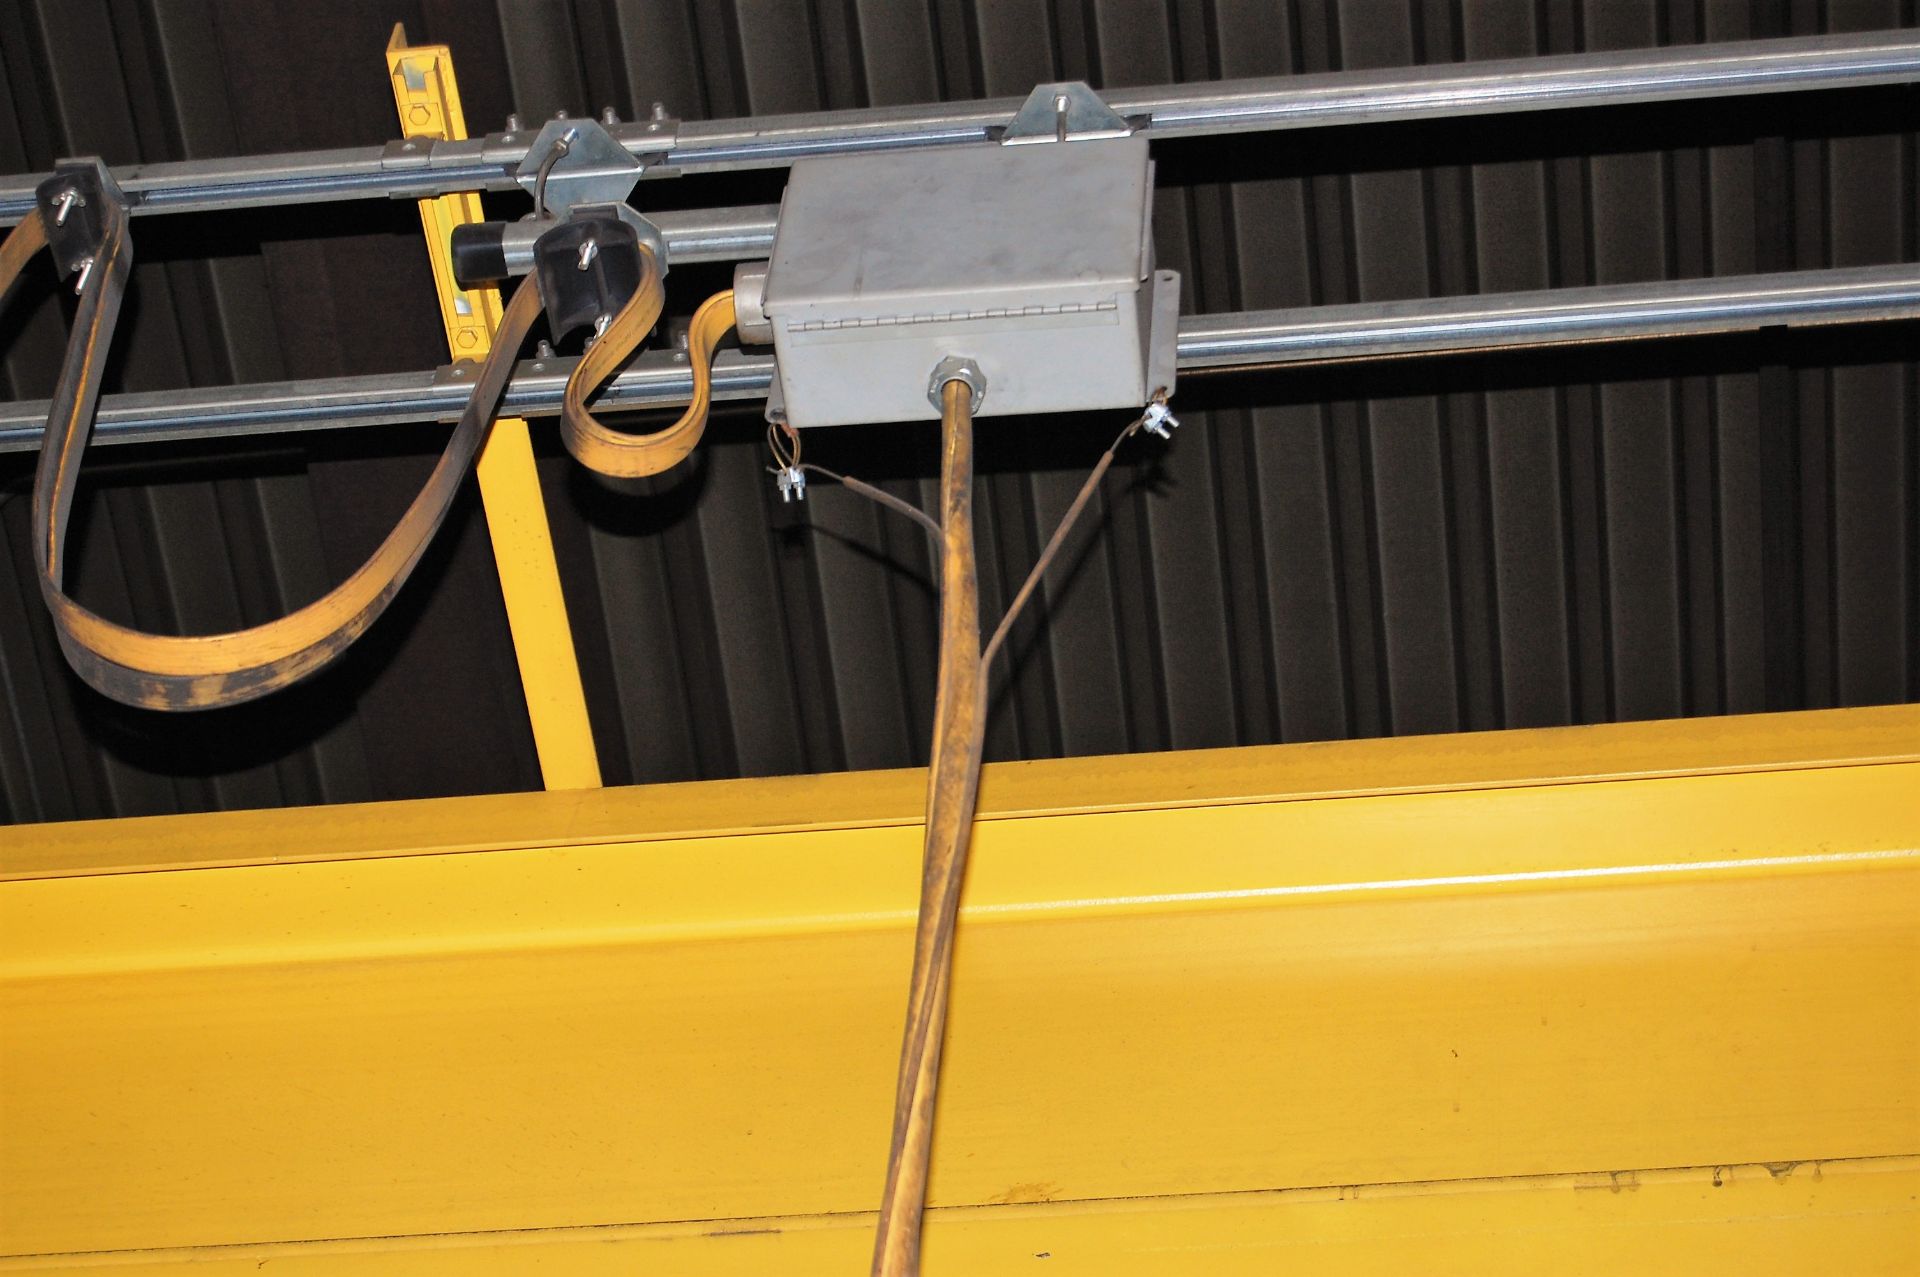 3 TON ACCO WRIGHT "SPEEDWAY" OVERHEAD BRIDGE CRANE, TOP RUNNING, SINGLE GIRDER, WITH APPROXIMATELY - Image 4 of 11